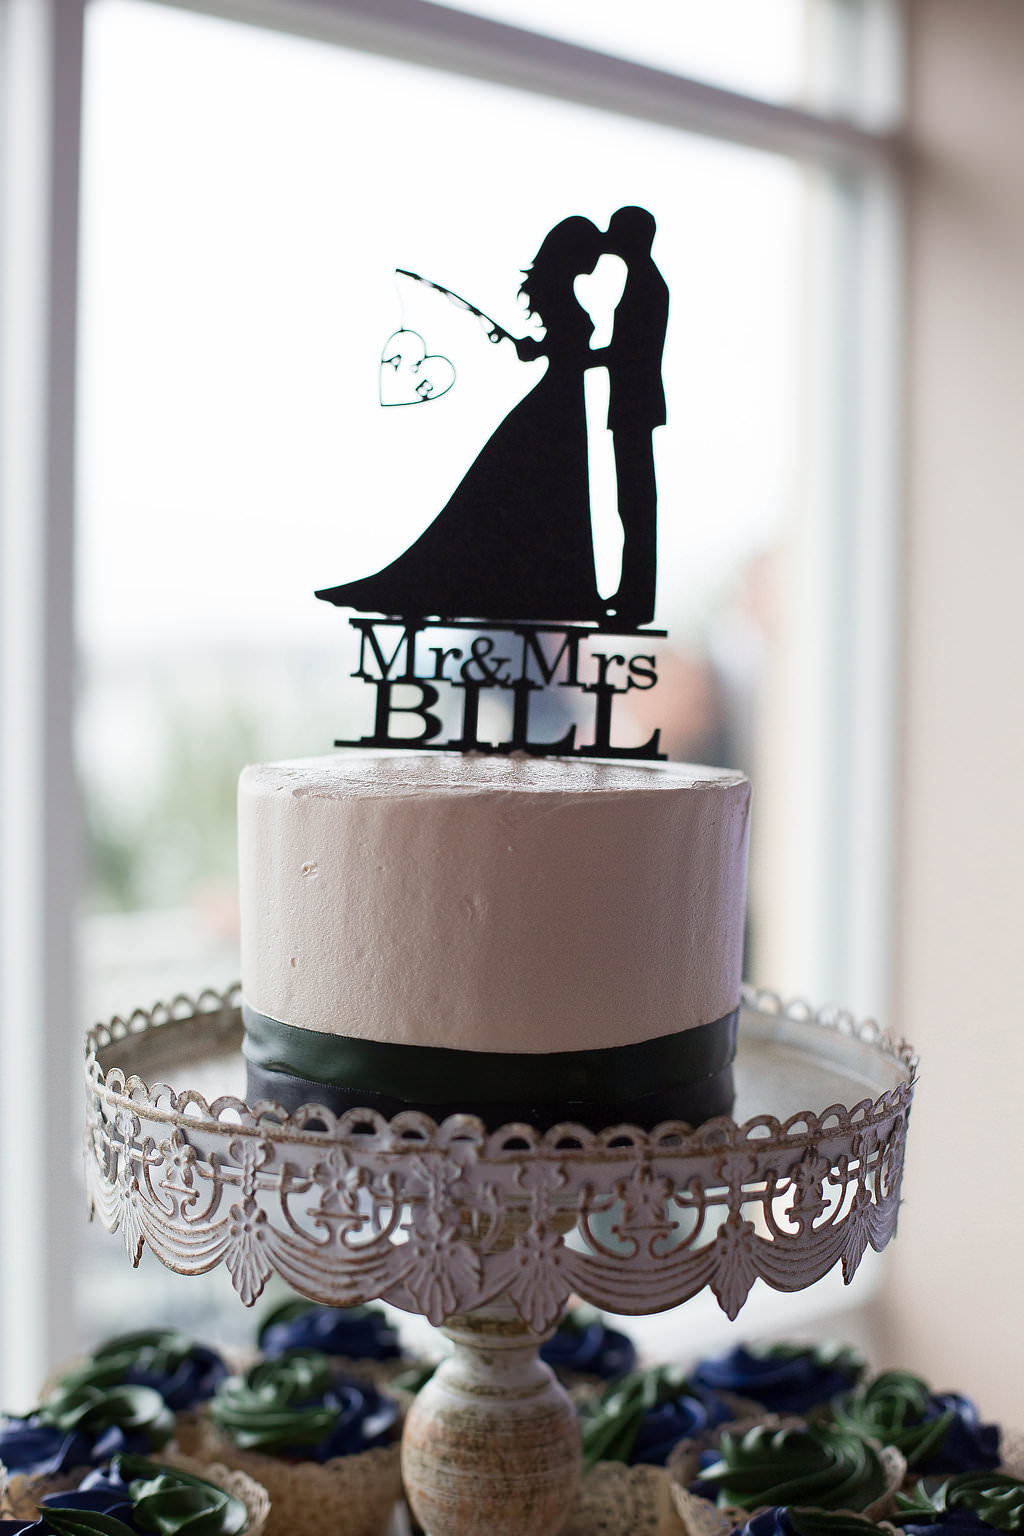 Single Tier White and Black Wedding Cake with Fishing Cake Topper